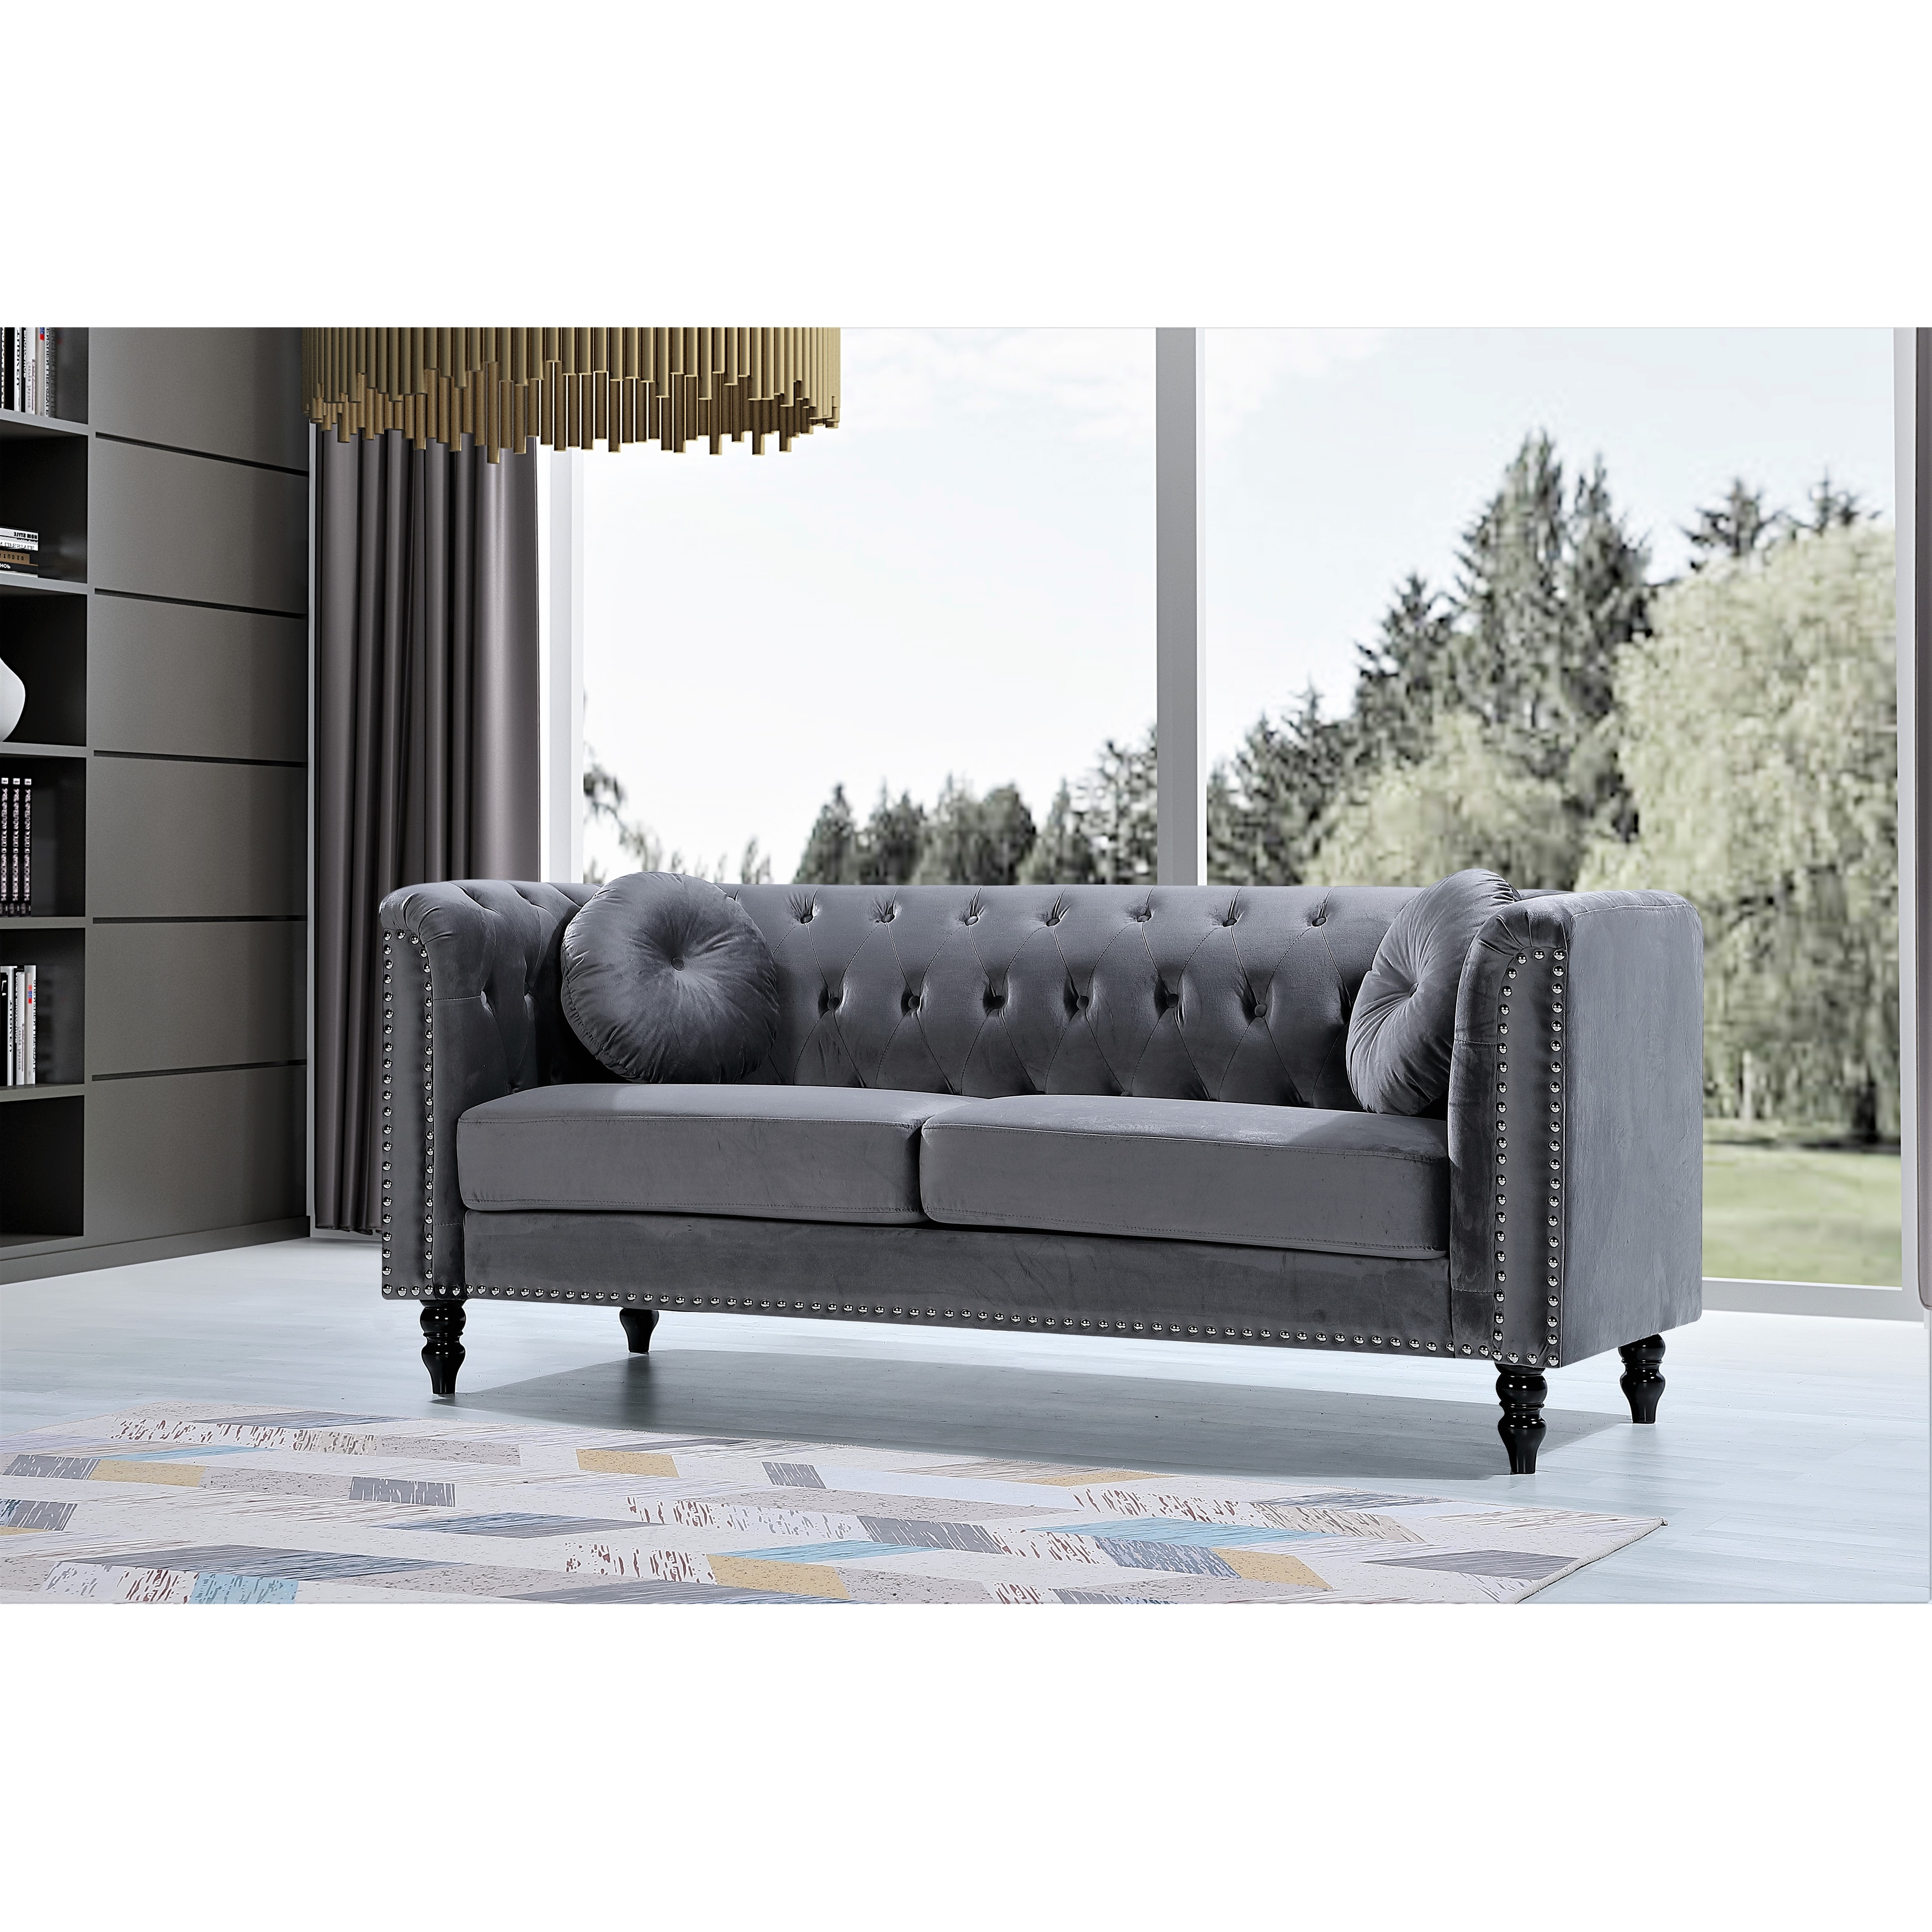 Chesterfield Chesterfield Couch Upholstered Sofa Classic velvet sofas couches furniture new 